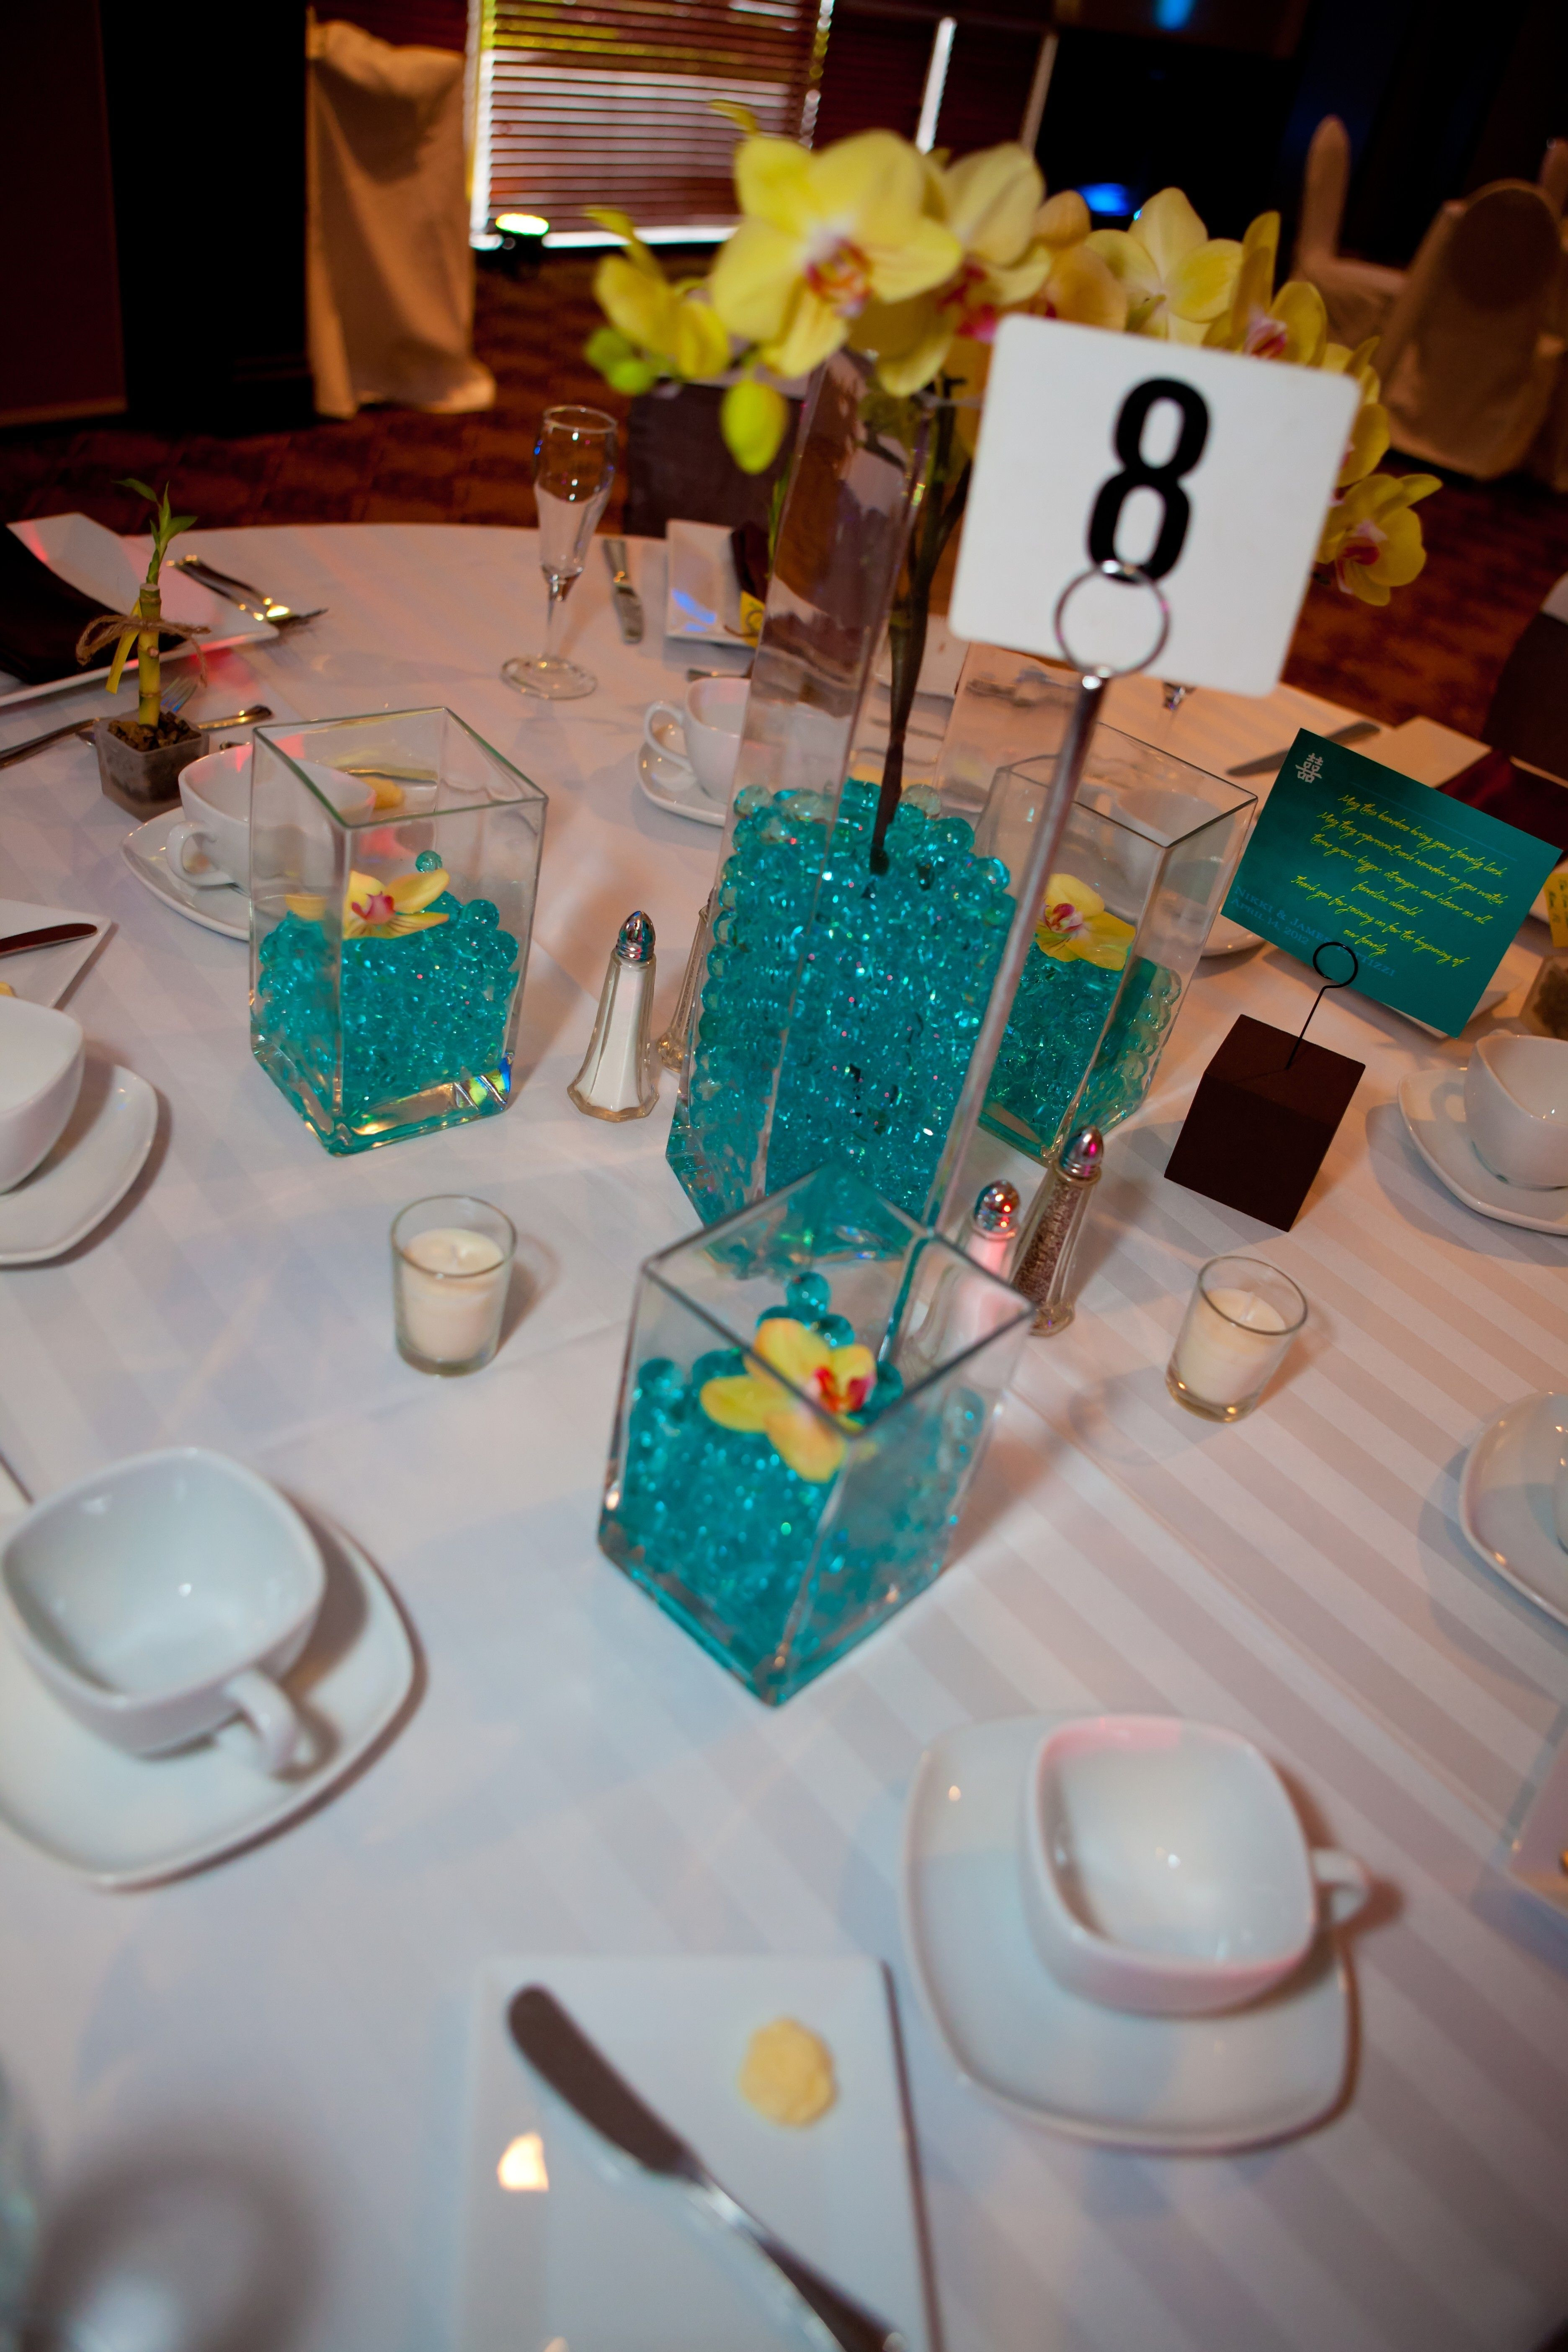 16 inch square vase of wedding centerpieces square vases teal water beads yellow inside square vases teal water beads yellow orchids candles